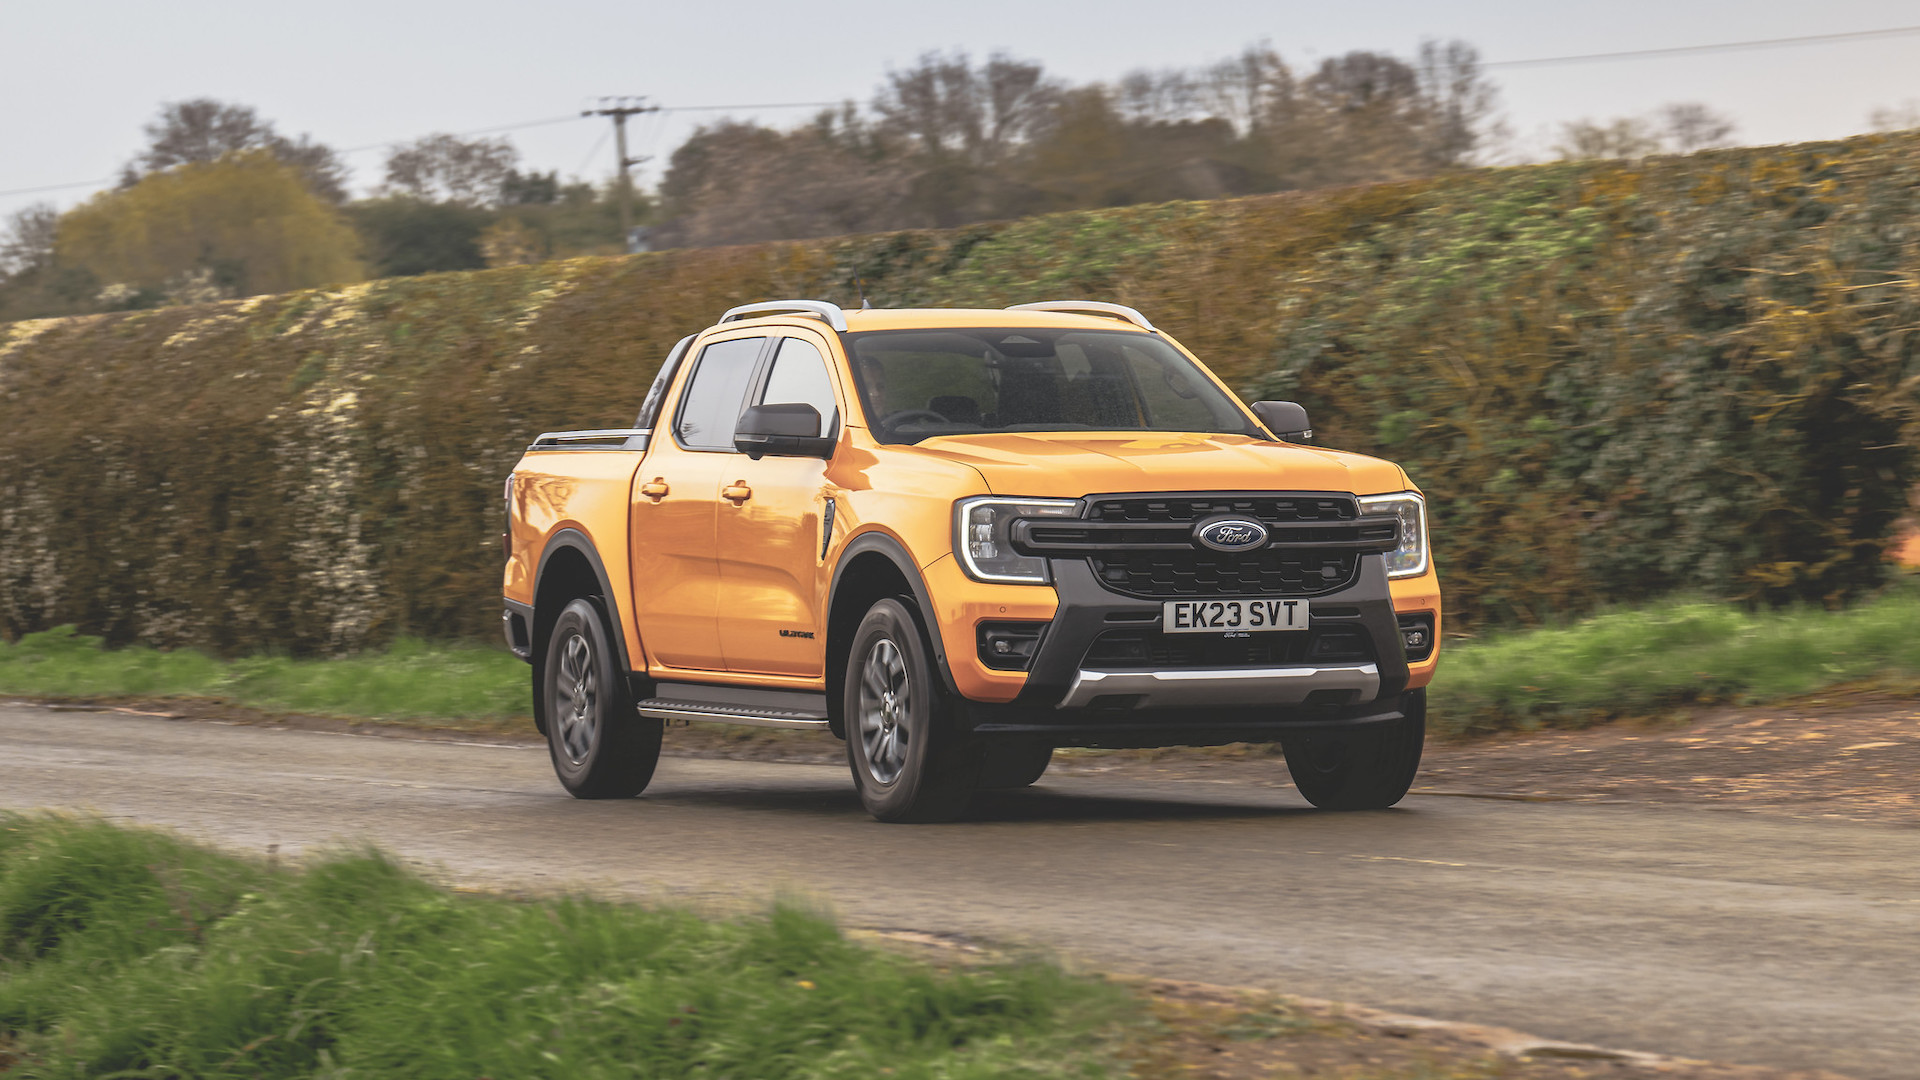 Ford Ranger Among Top 10 Slowest Selling New Cars